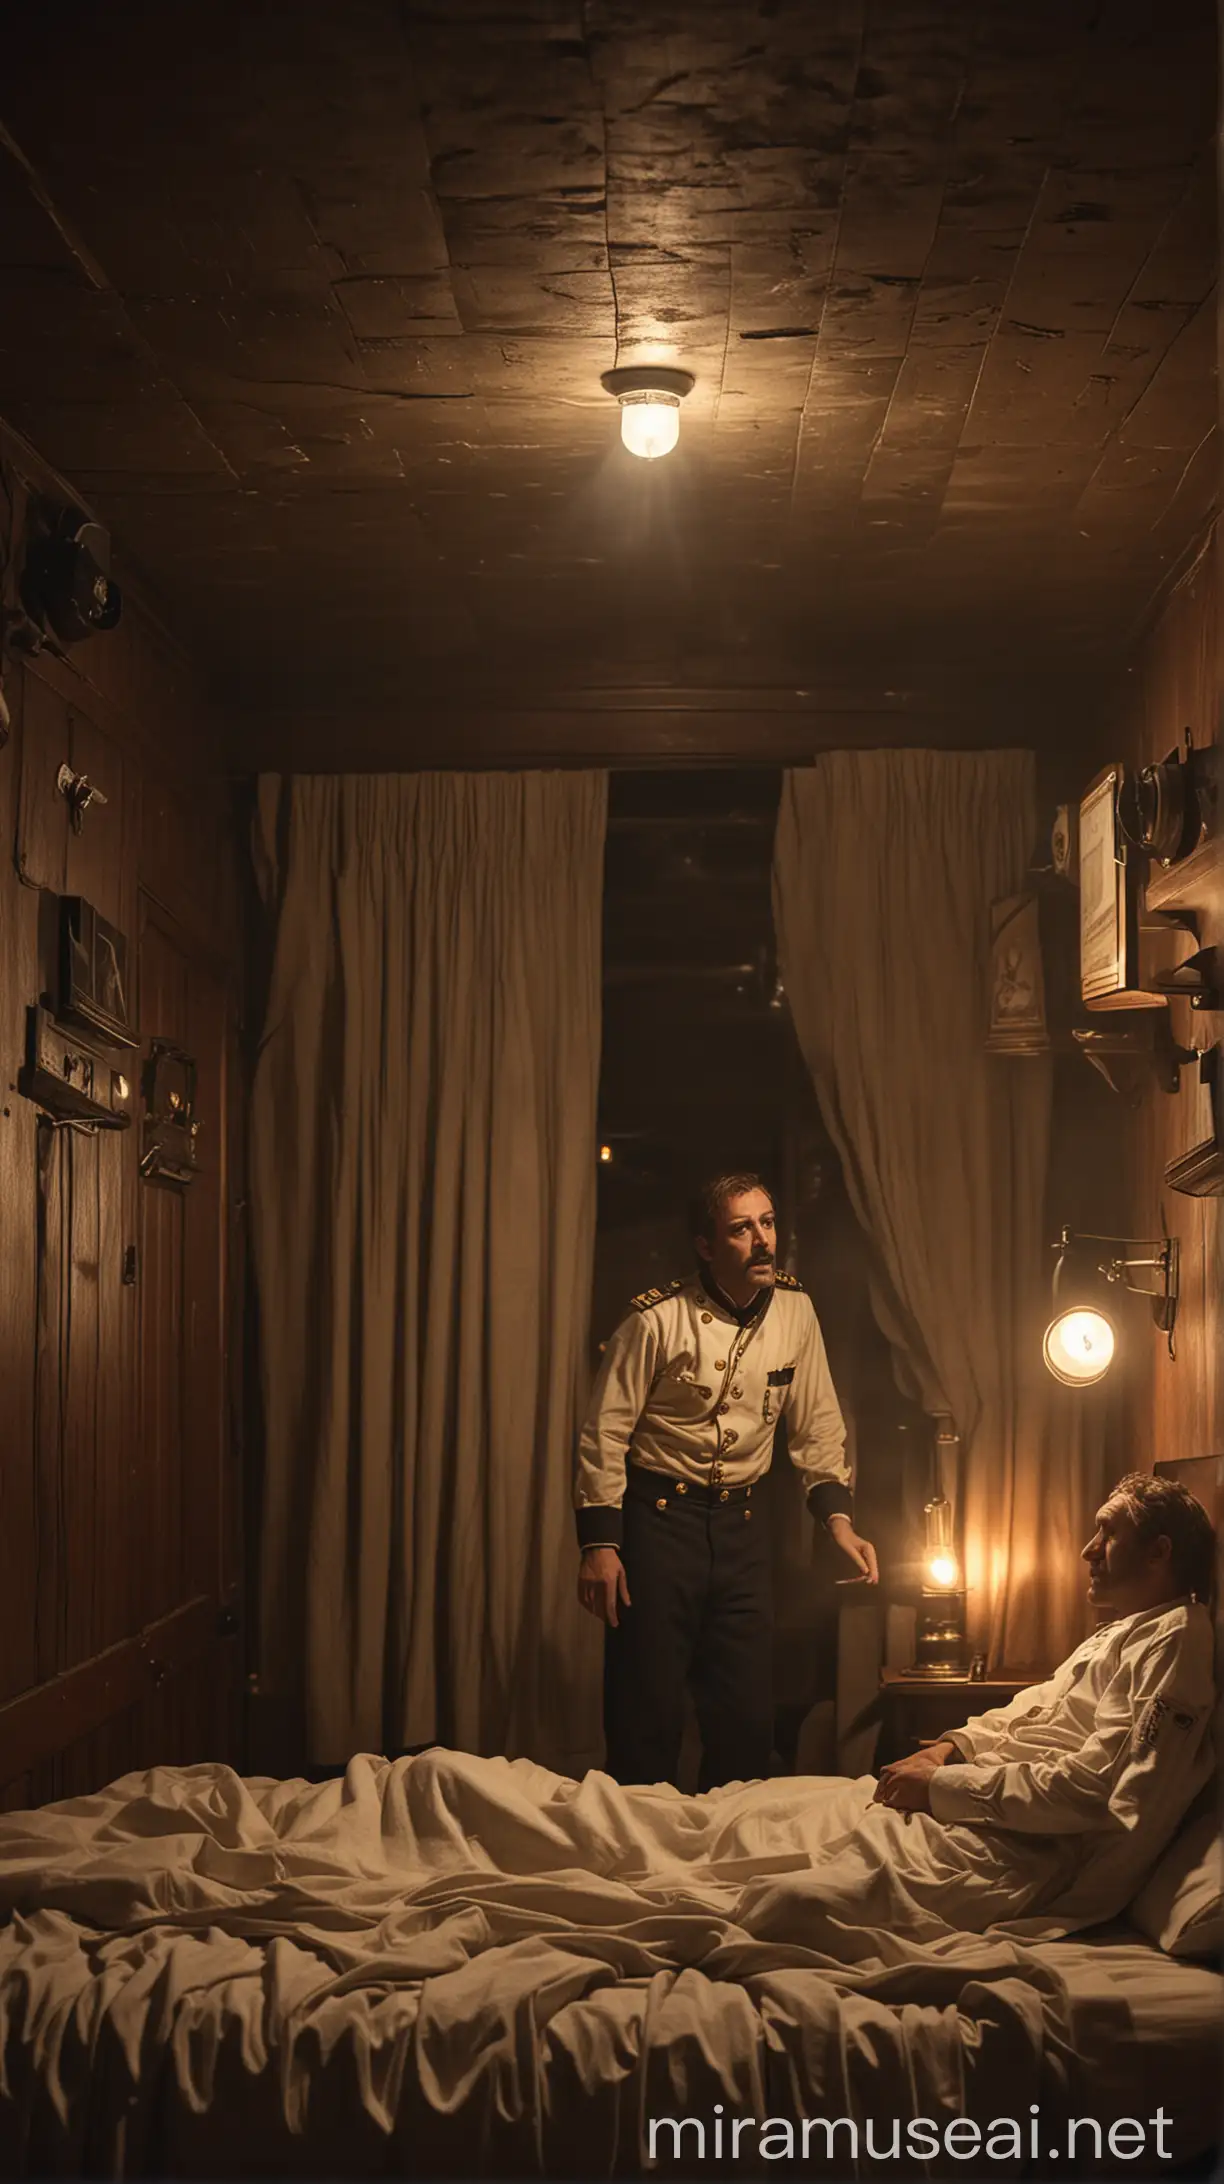 Inside Captain Stanley Lord's cabin on the SS Californian, he is seen in bed, being woken by a crew member reporting the flares. The captain looks dismissive and uninterested, waving off the crew member's concerns. The cabin is dimly lit, highlighting his indifference. hyper realistic